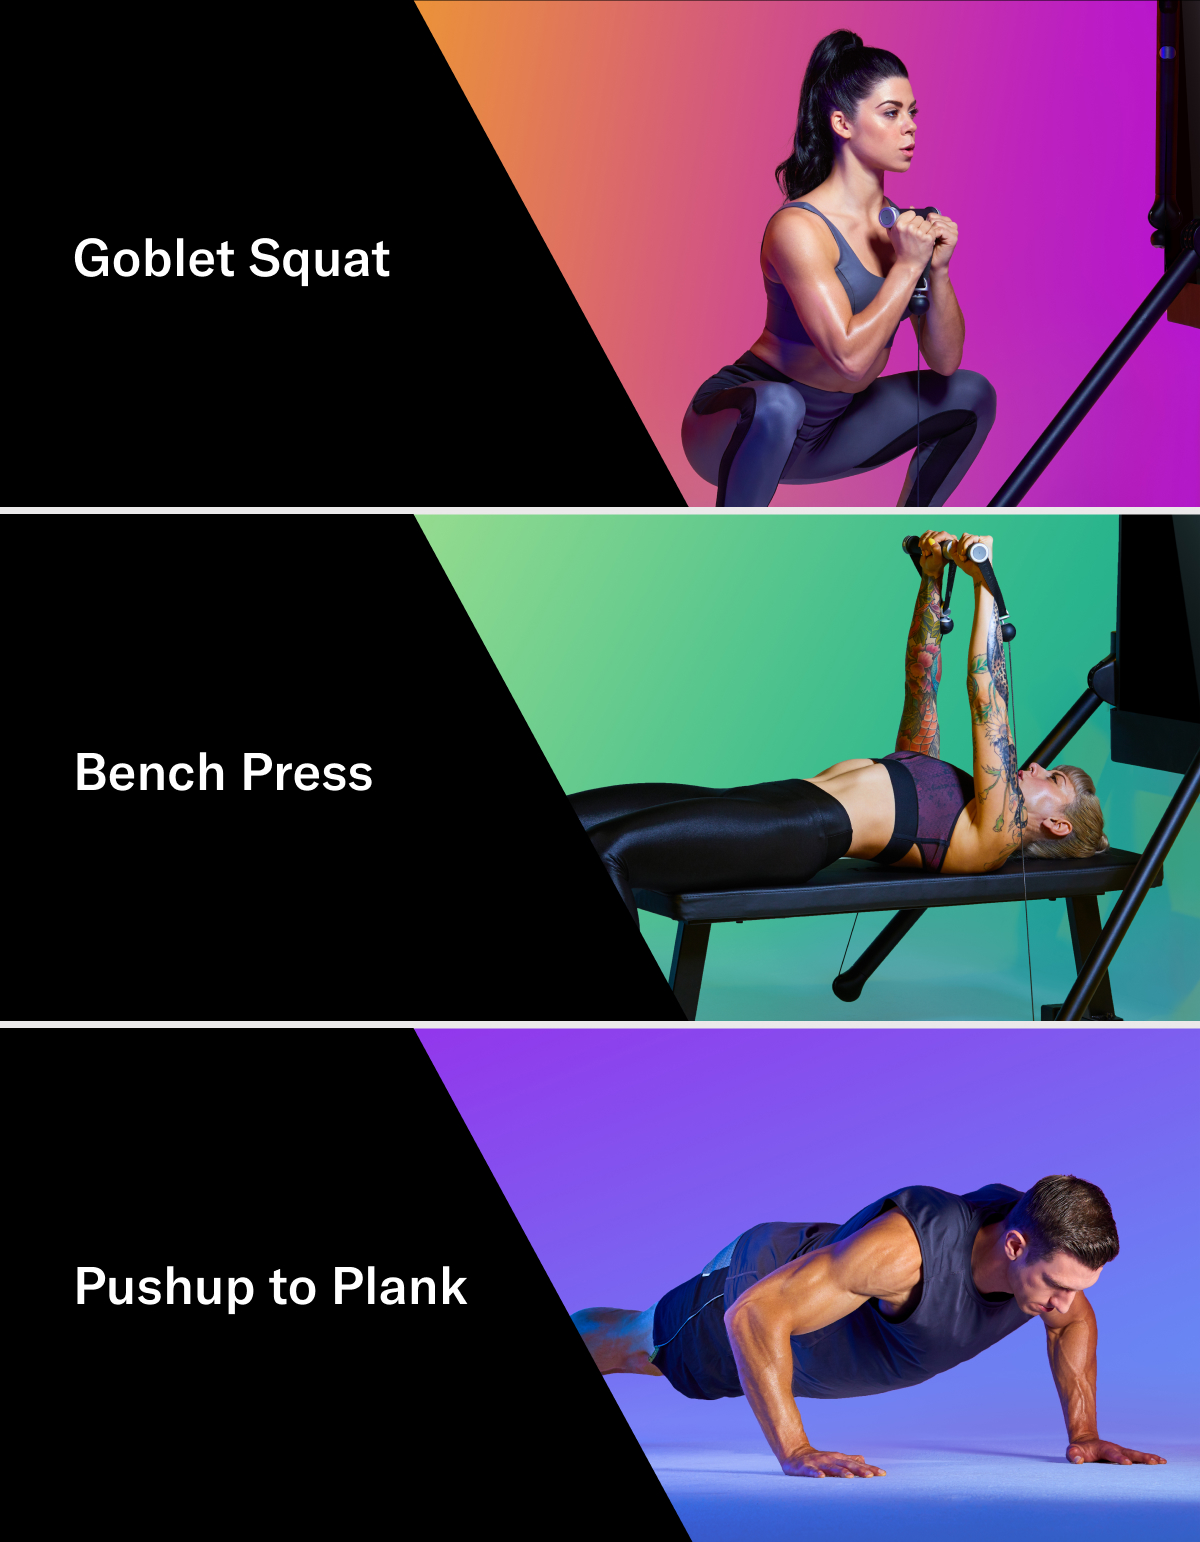 an image of a woman doing a goblet squat, another image of a woman doing a bench press, and a man doing a pushup to plank highlighting the top moves of the year 